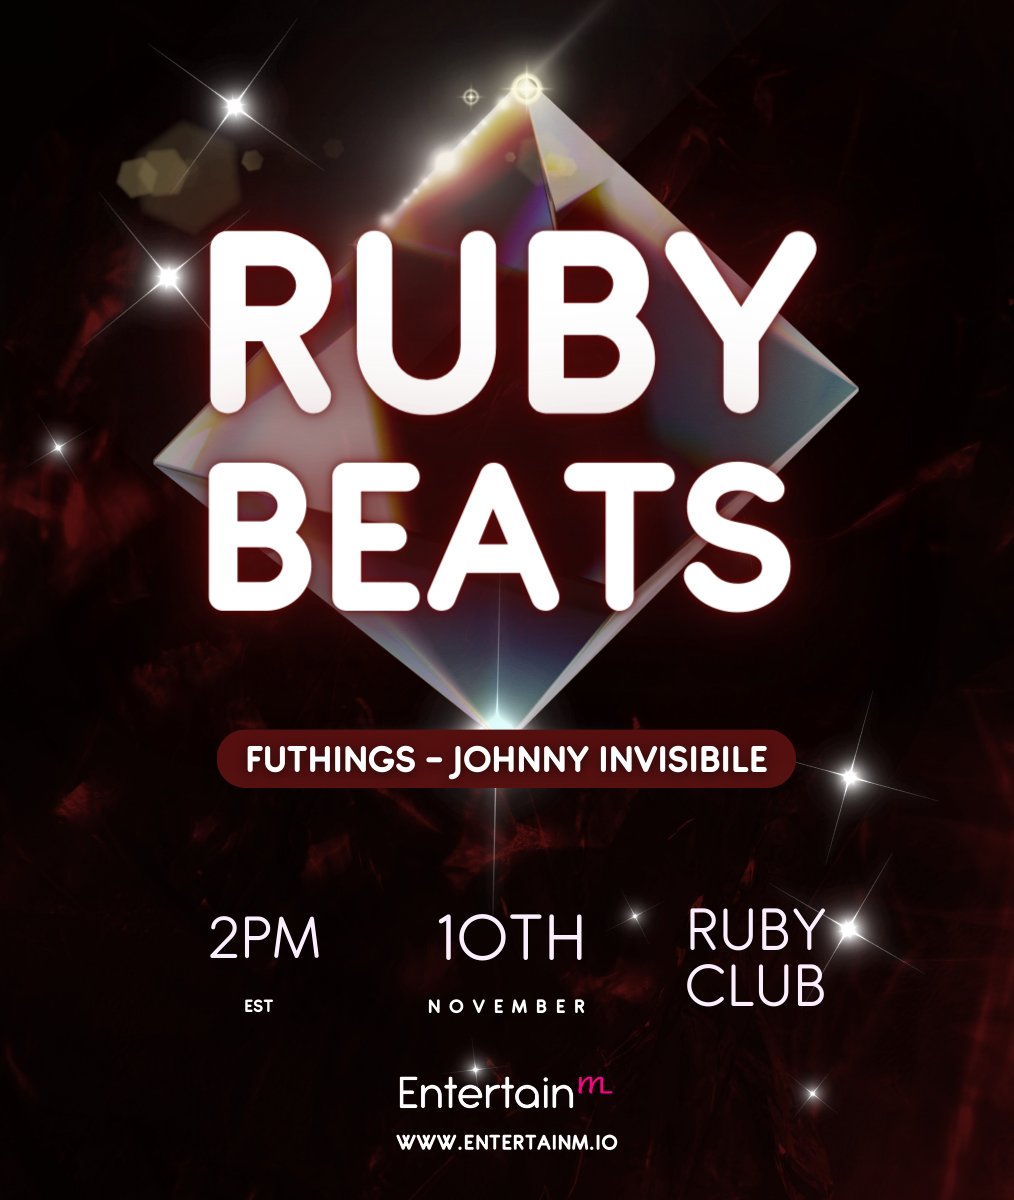 Ruby Beats with Futhings & @JohnInvis! Party like the old times in Ruby Club with 2 new DJs🤩 📆 10th of November, 2pm EST 📌Reserve your spot here: entertainm.io/events/Ruby-Be… LFPARTY #EntertainM #4clubs